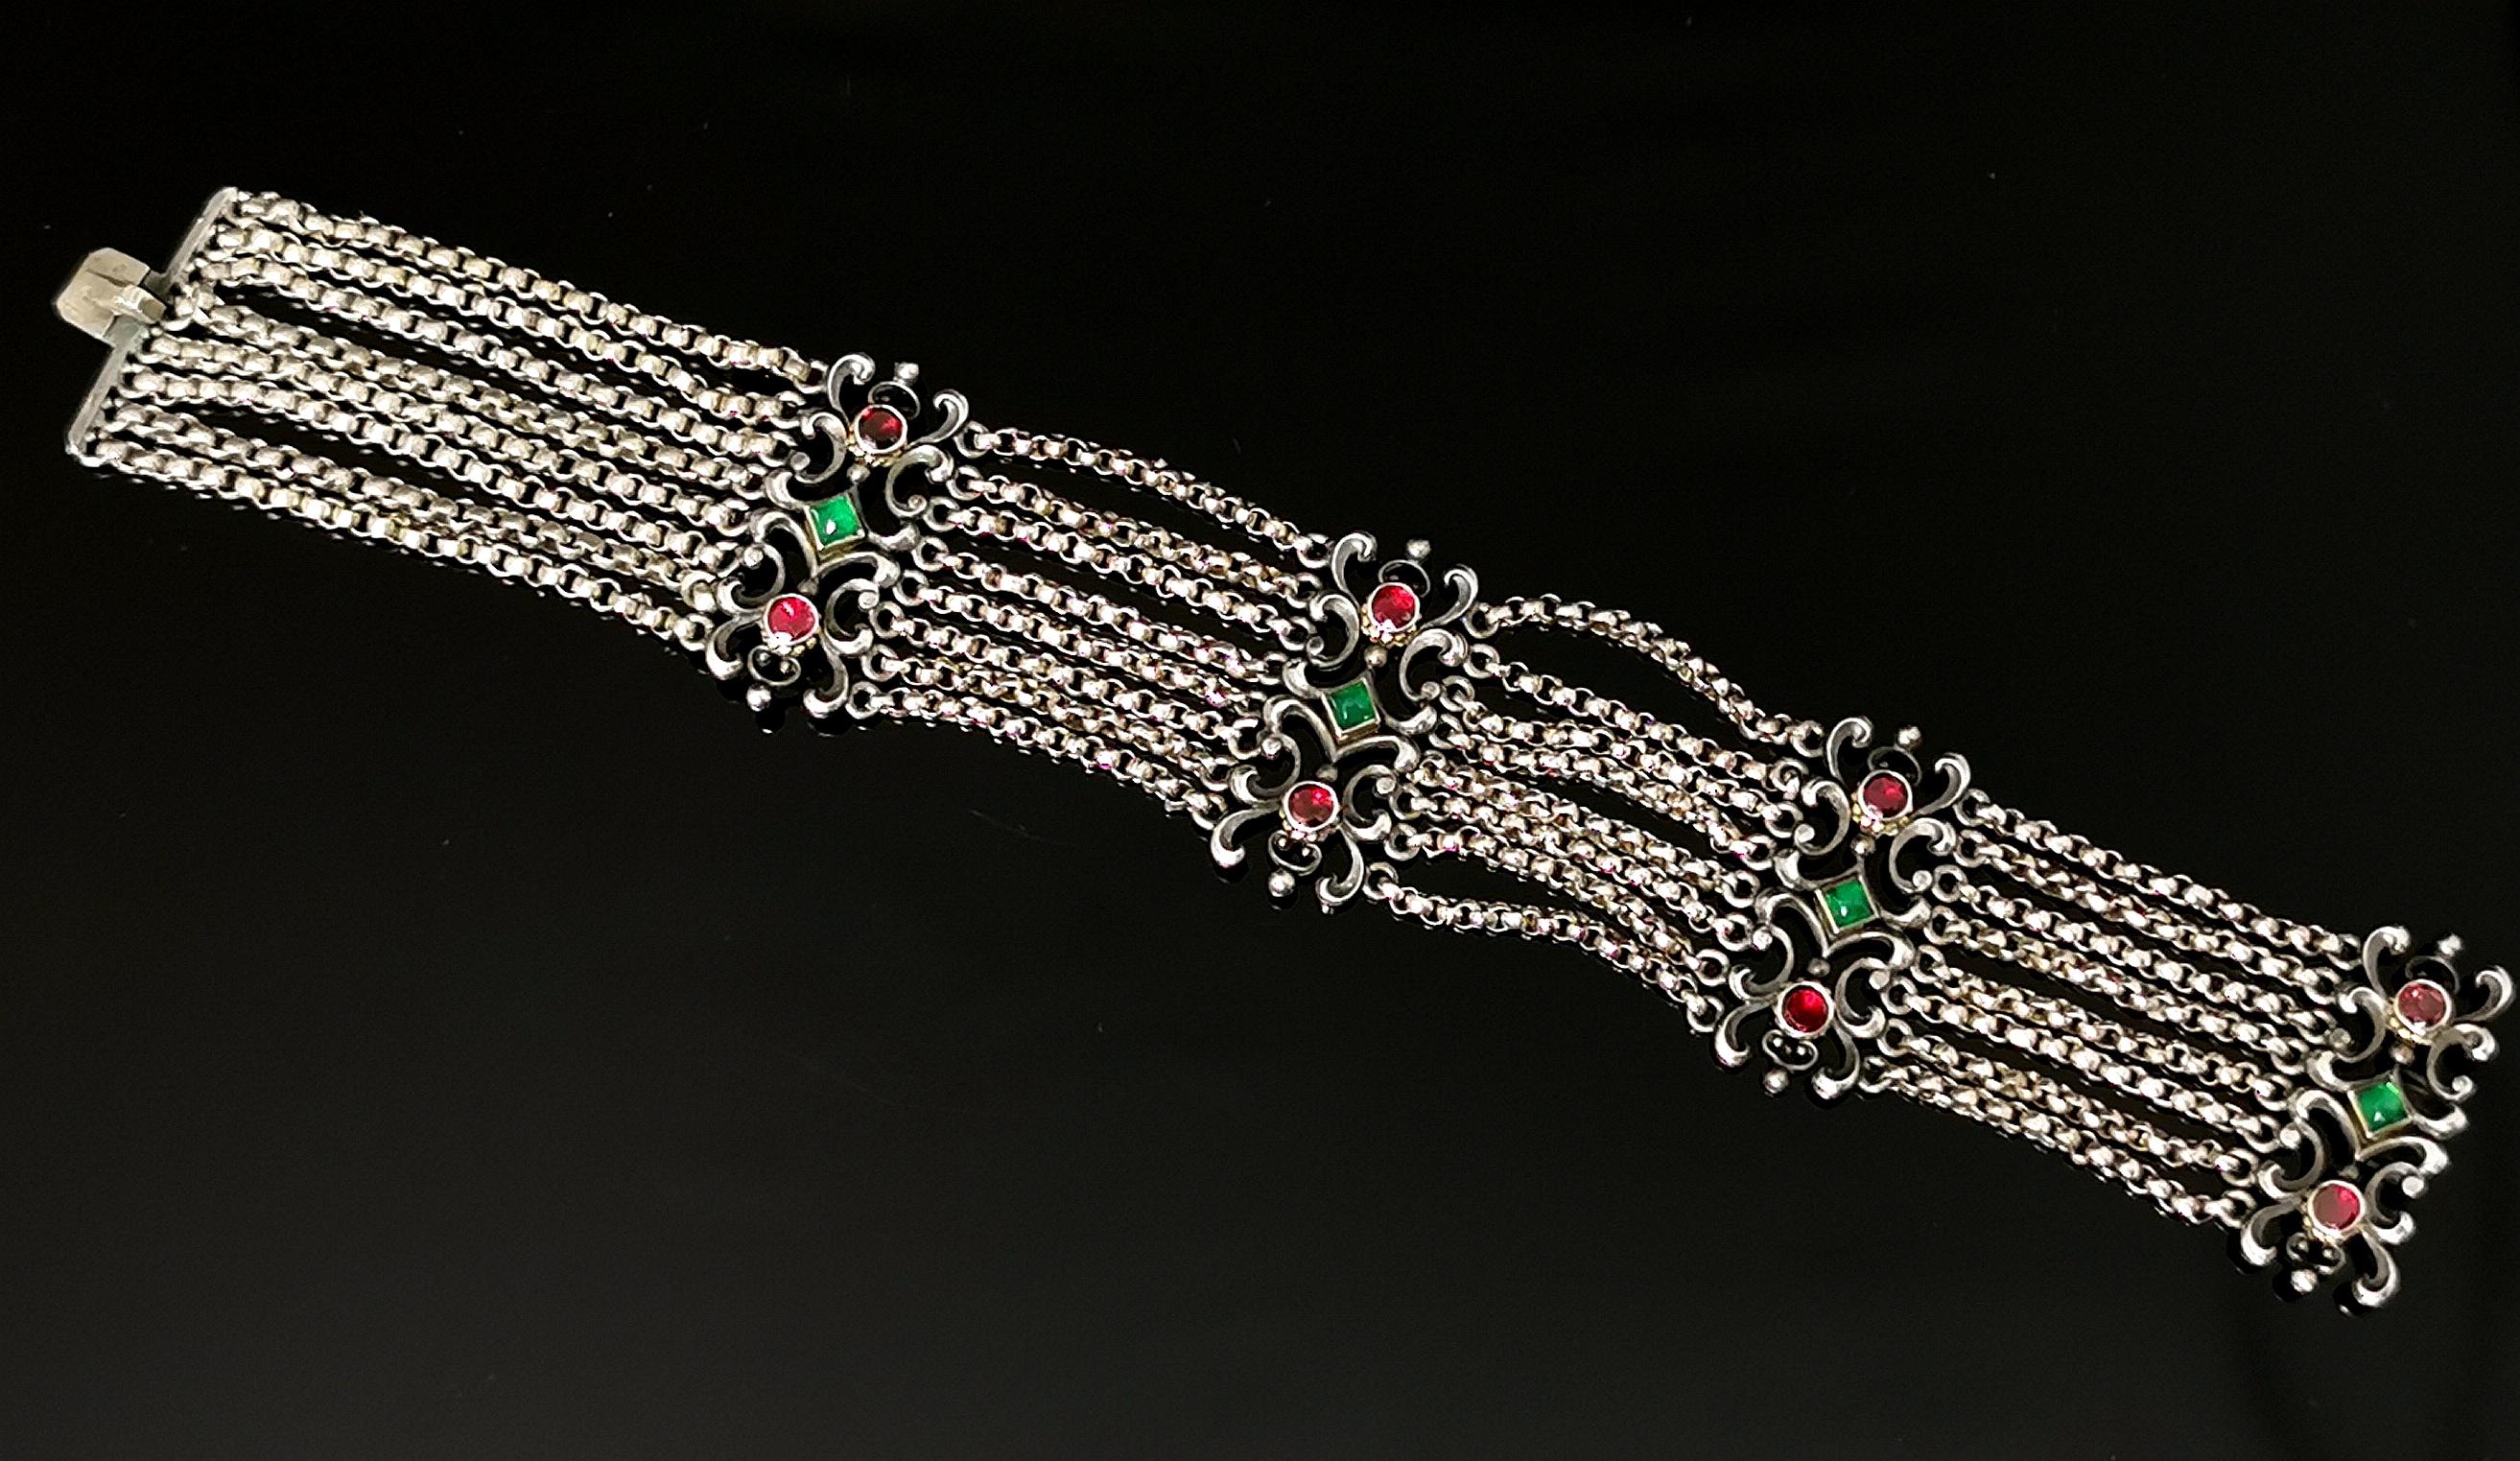 A gorgeous antique Austro-Hungarian bracelet.

This is a multi-strand bracelet with eight rows of silver rolo or belcher chain joined together with jewelled, scrolling silver panel spacers.

The bracelet is set with rich red garnets and green